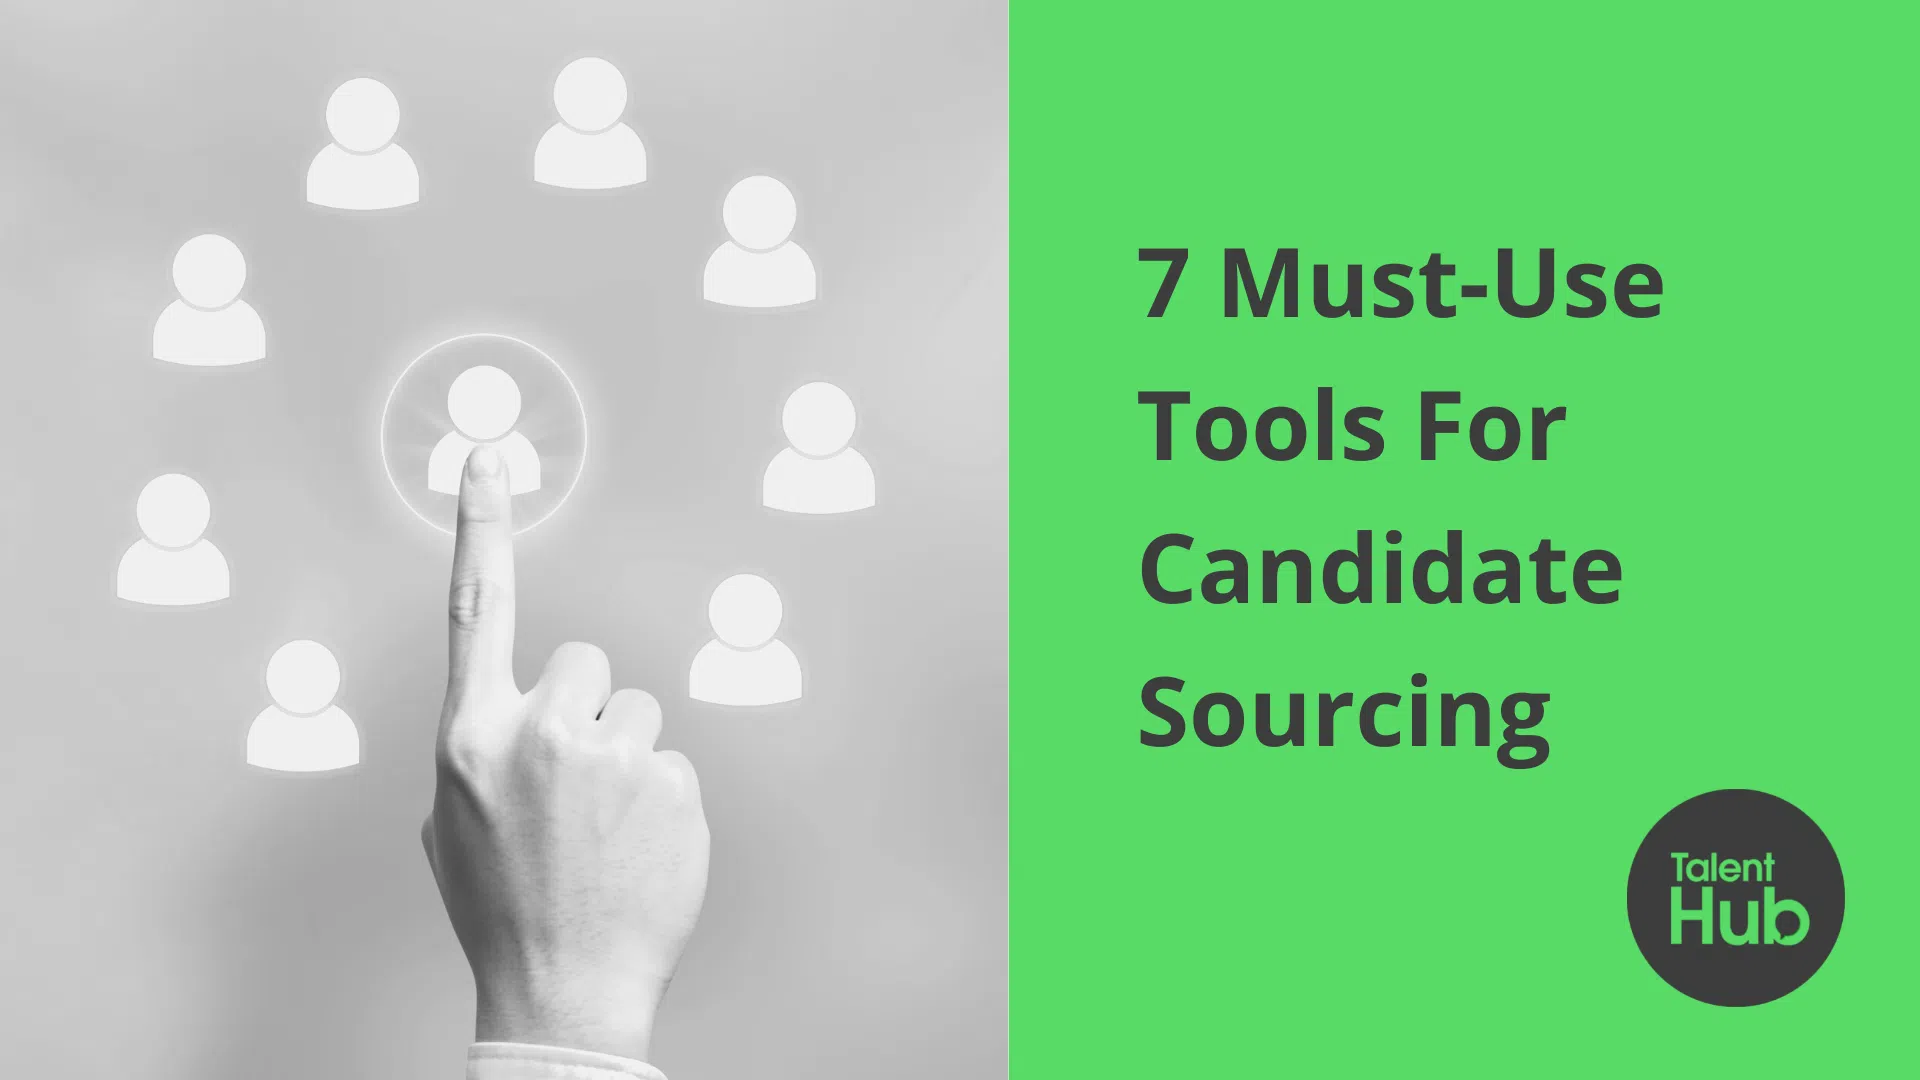 7 Must-Use Tools For Candidate Sourcing